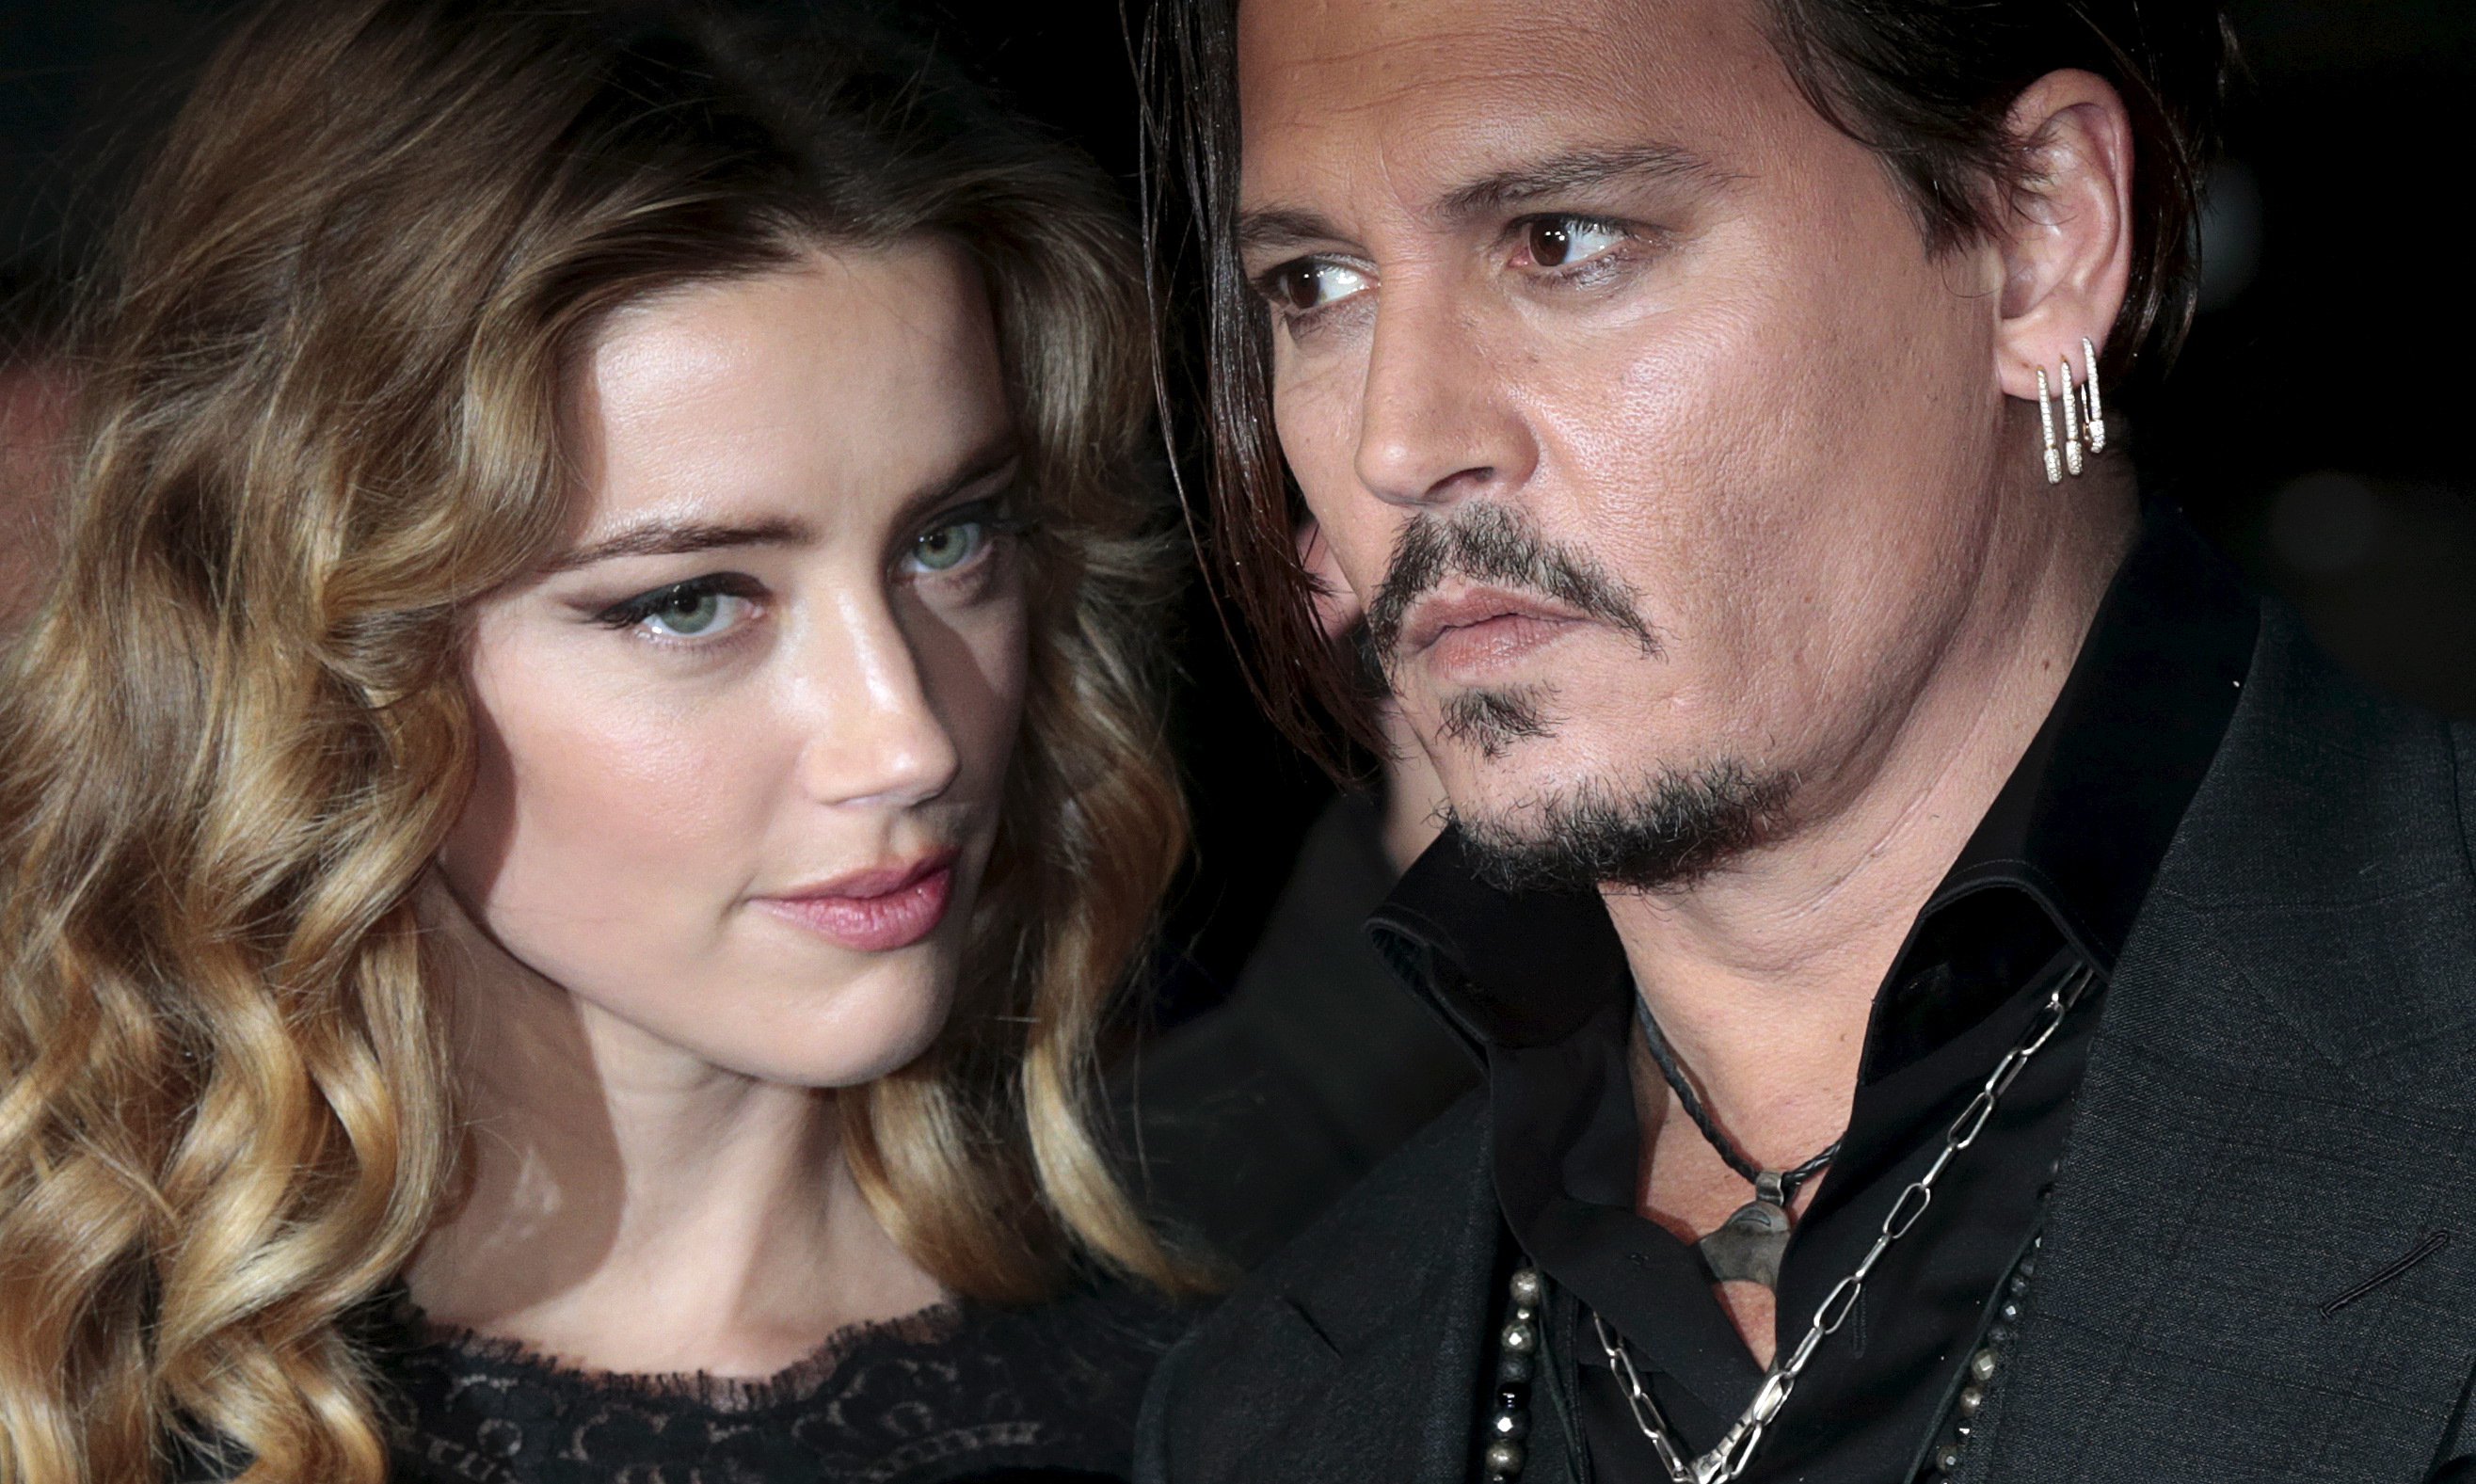 Johnny Depp Accused Of Domestic Violence According To Amber Heard Divorce Petition